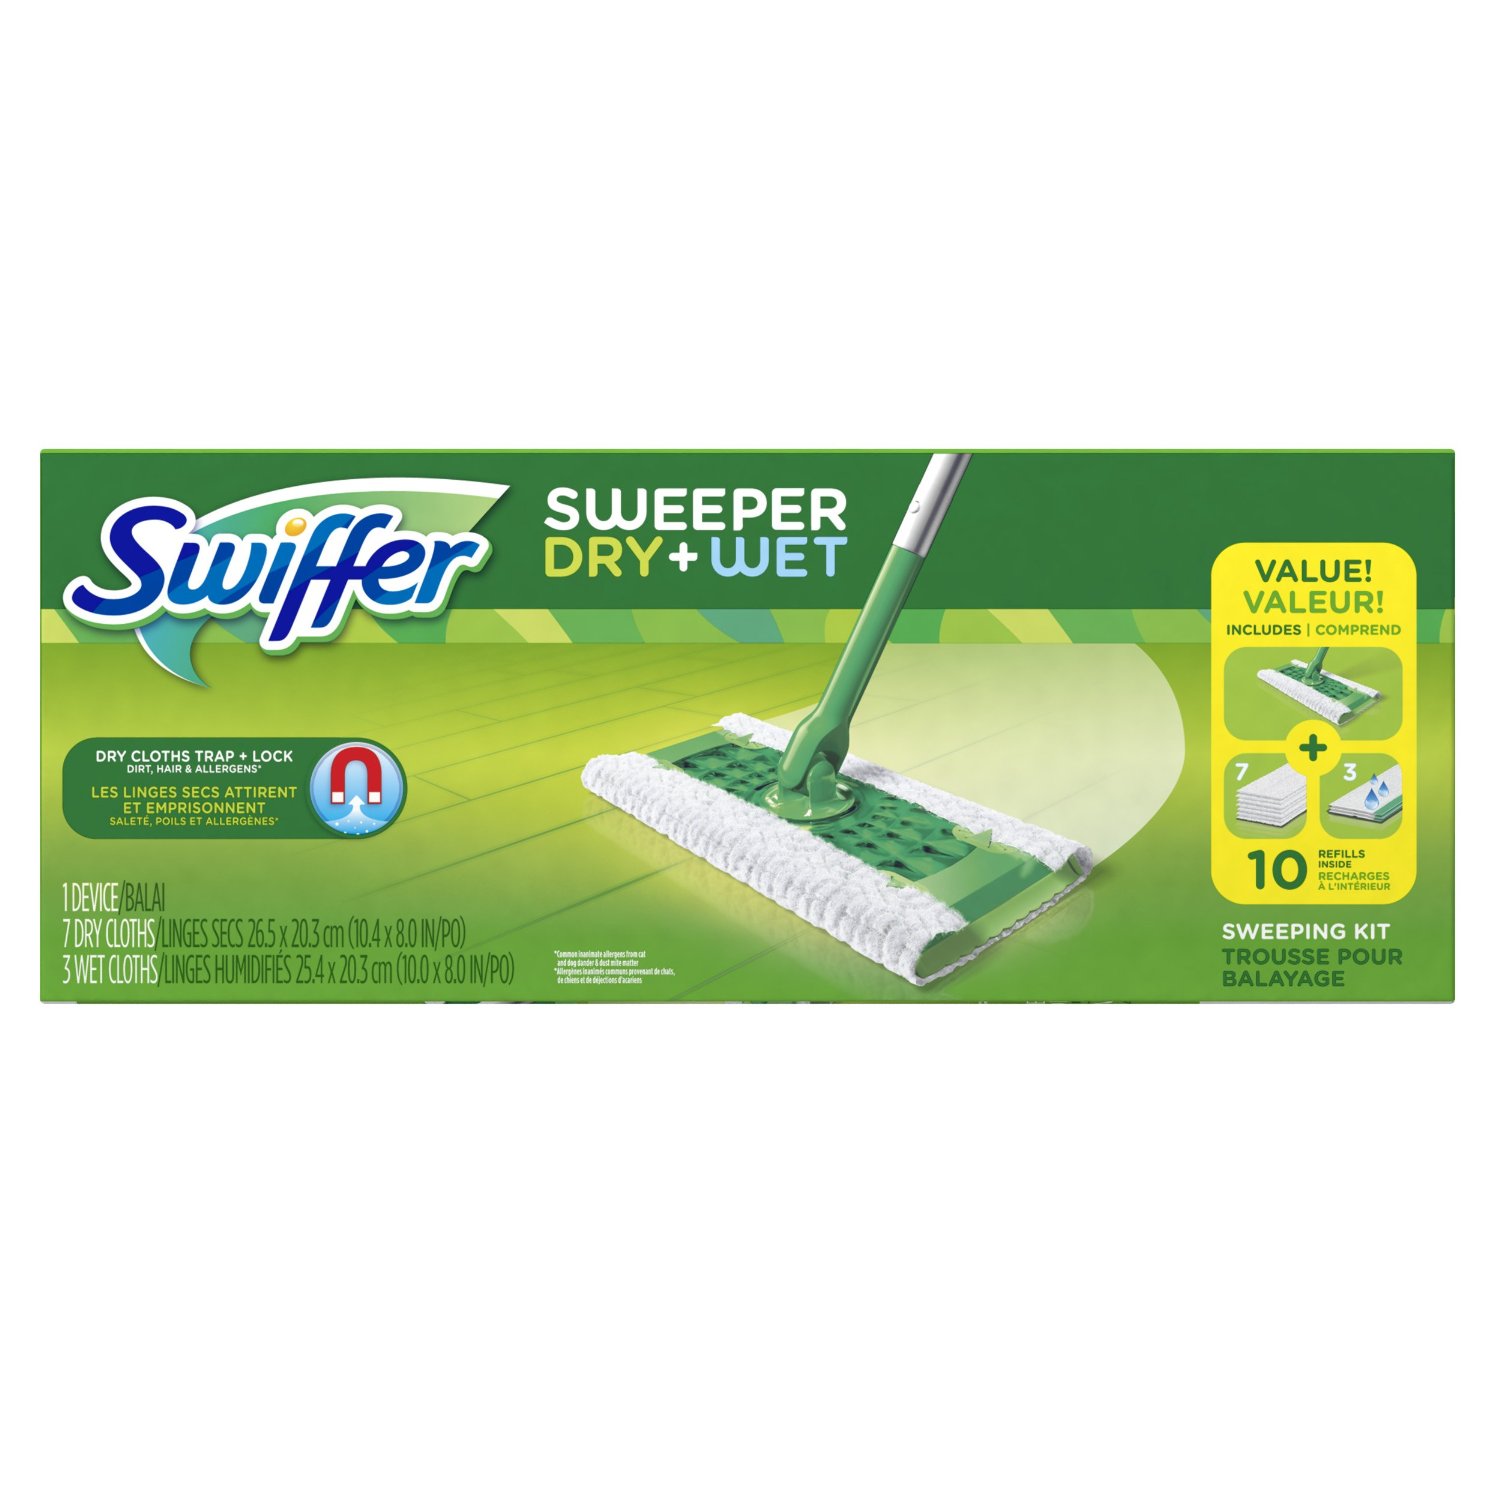 Swiffer Sweeper Cleaner Dry and Wet Mop Starter Kit – Just $8.99!